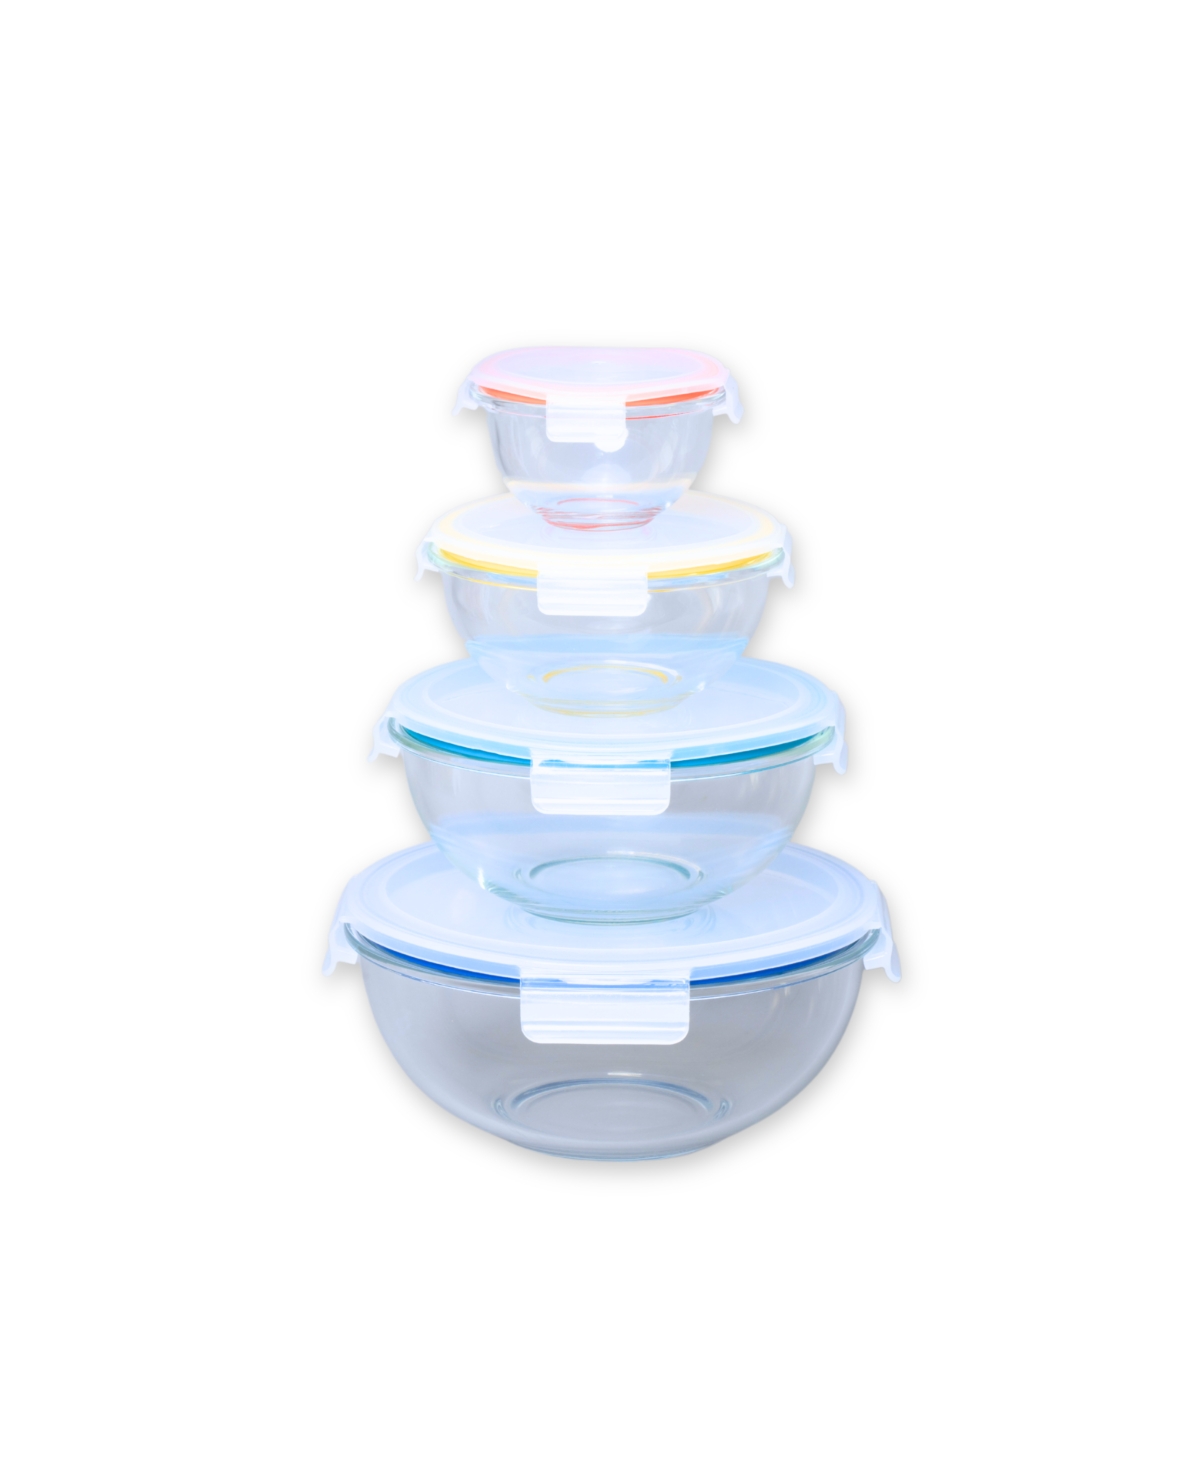 Genicook 8 Pc Nesting Borosilicate Glass Salad And Mixing Bowl Set With Lids In Multicolor